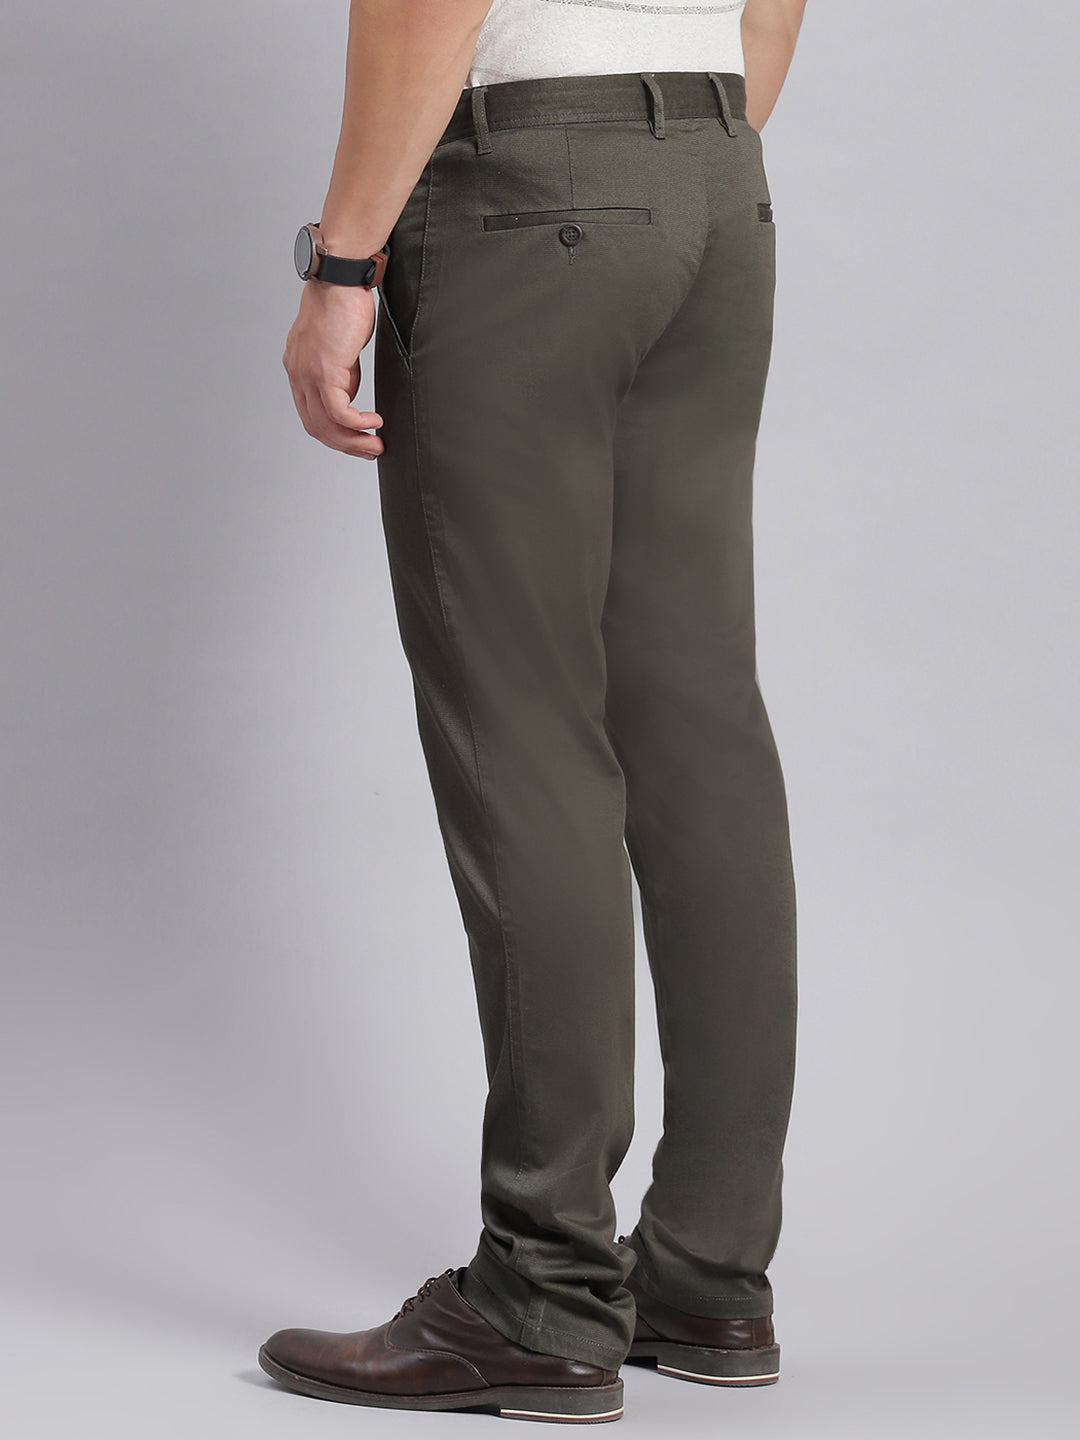 Buy Regular Fit Men Trousers Gray Poly Cotton Blend for Best Price,  Reviews, Free Shipping